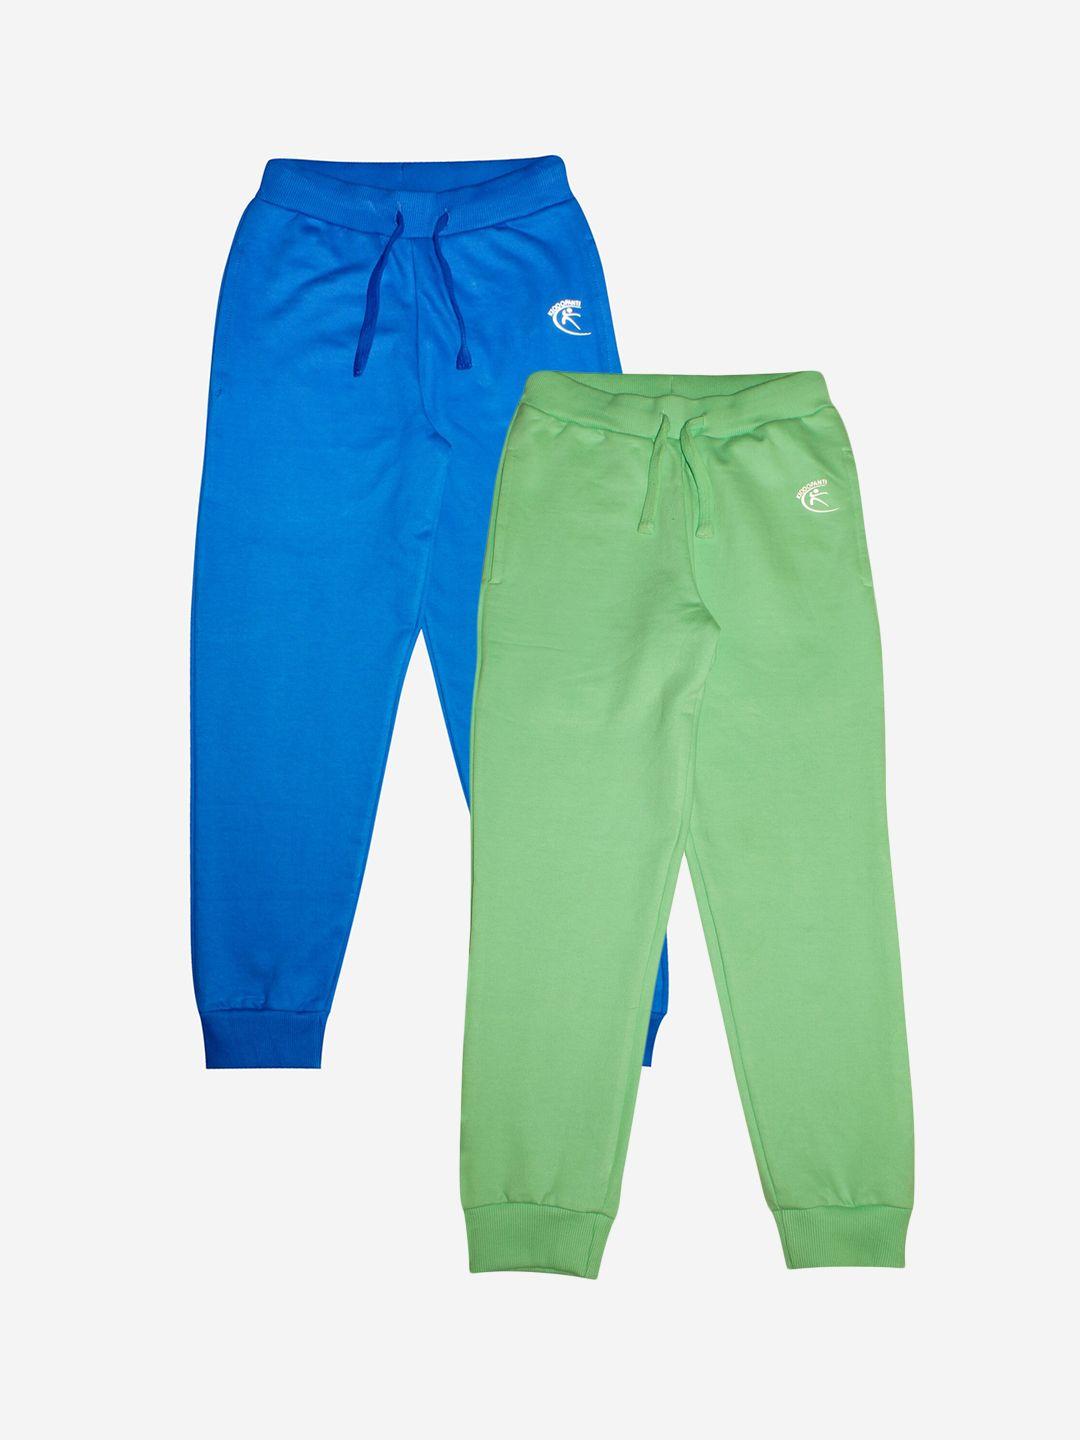 kiddopanti kids pack of 2 blue & green solid pure cotton joggers